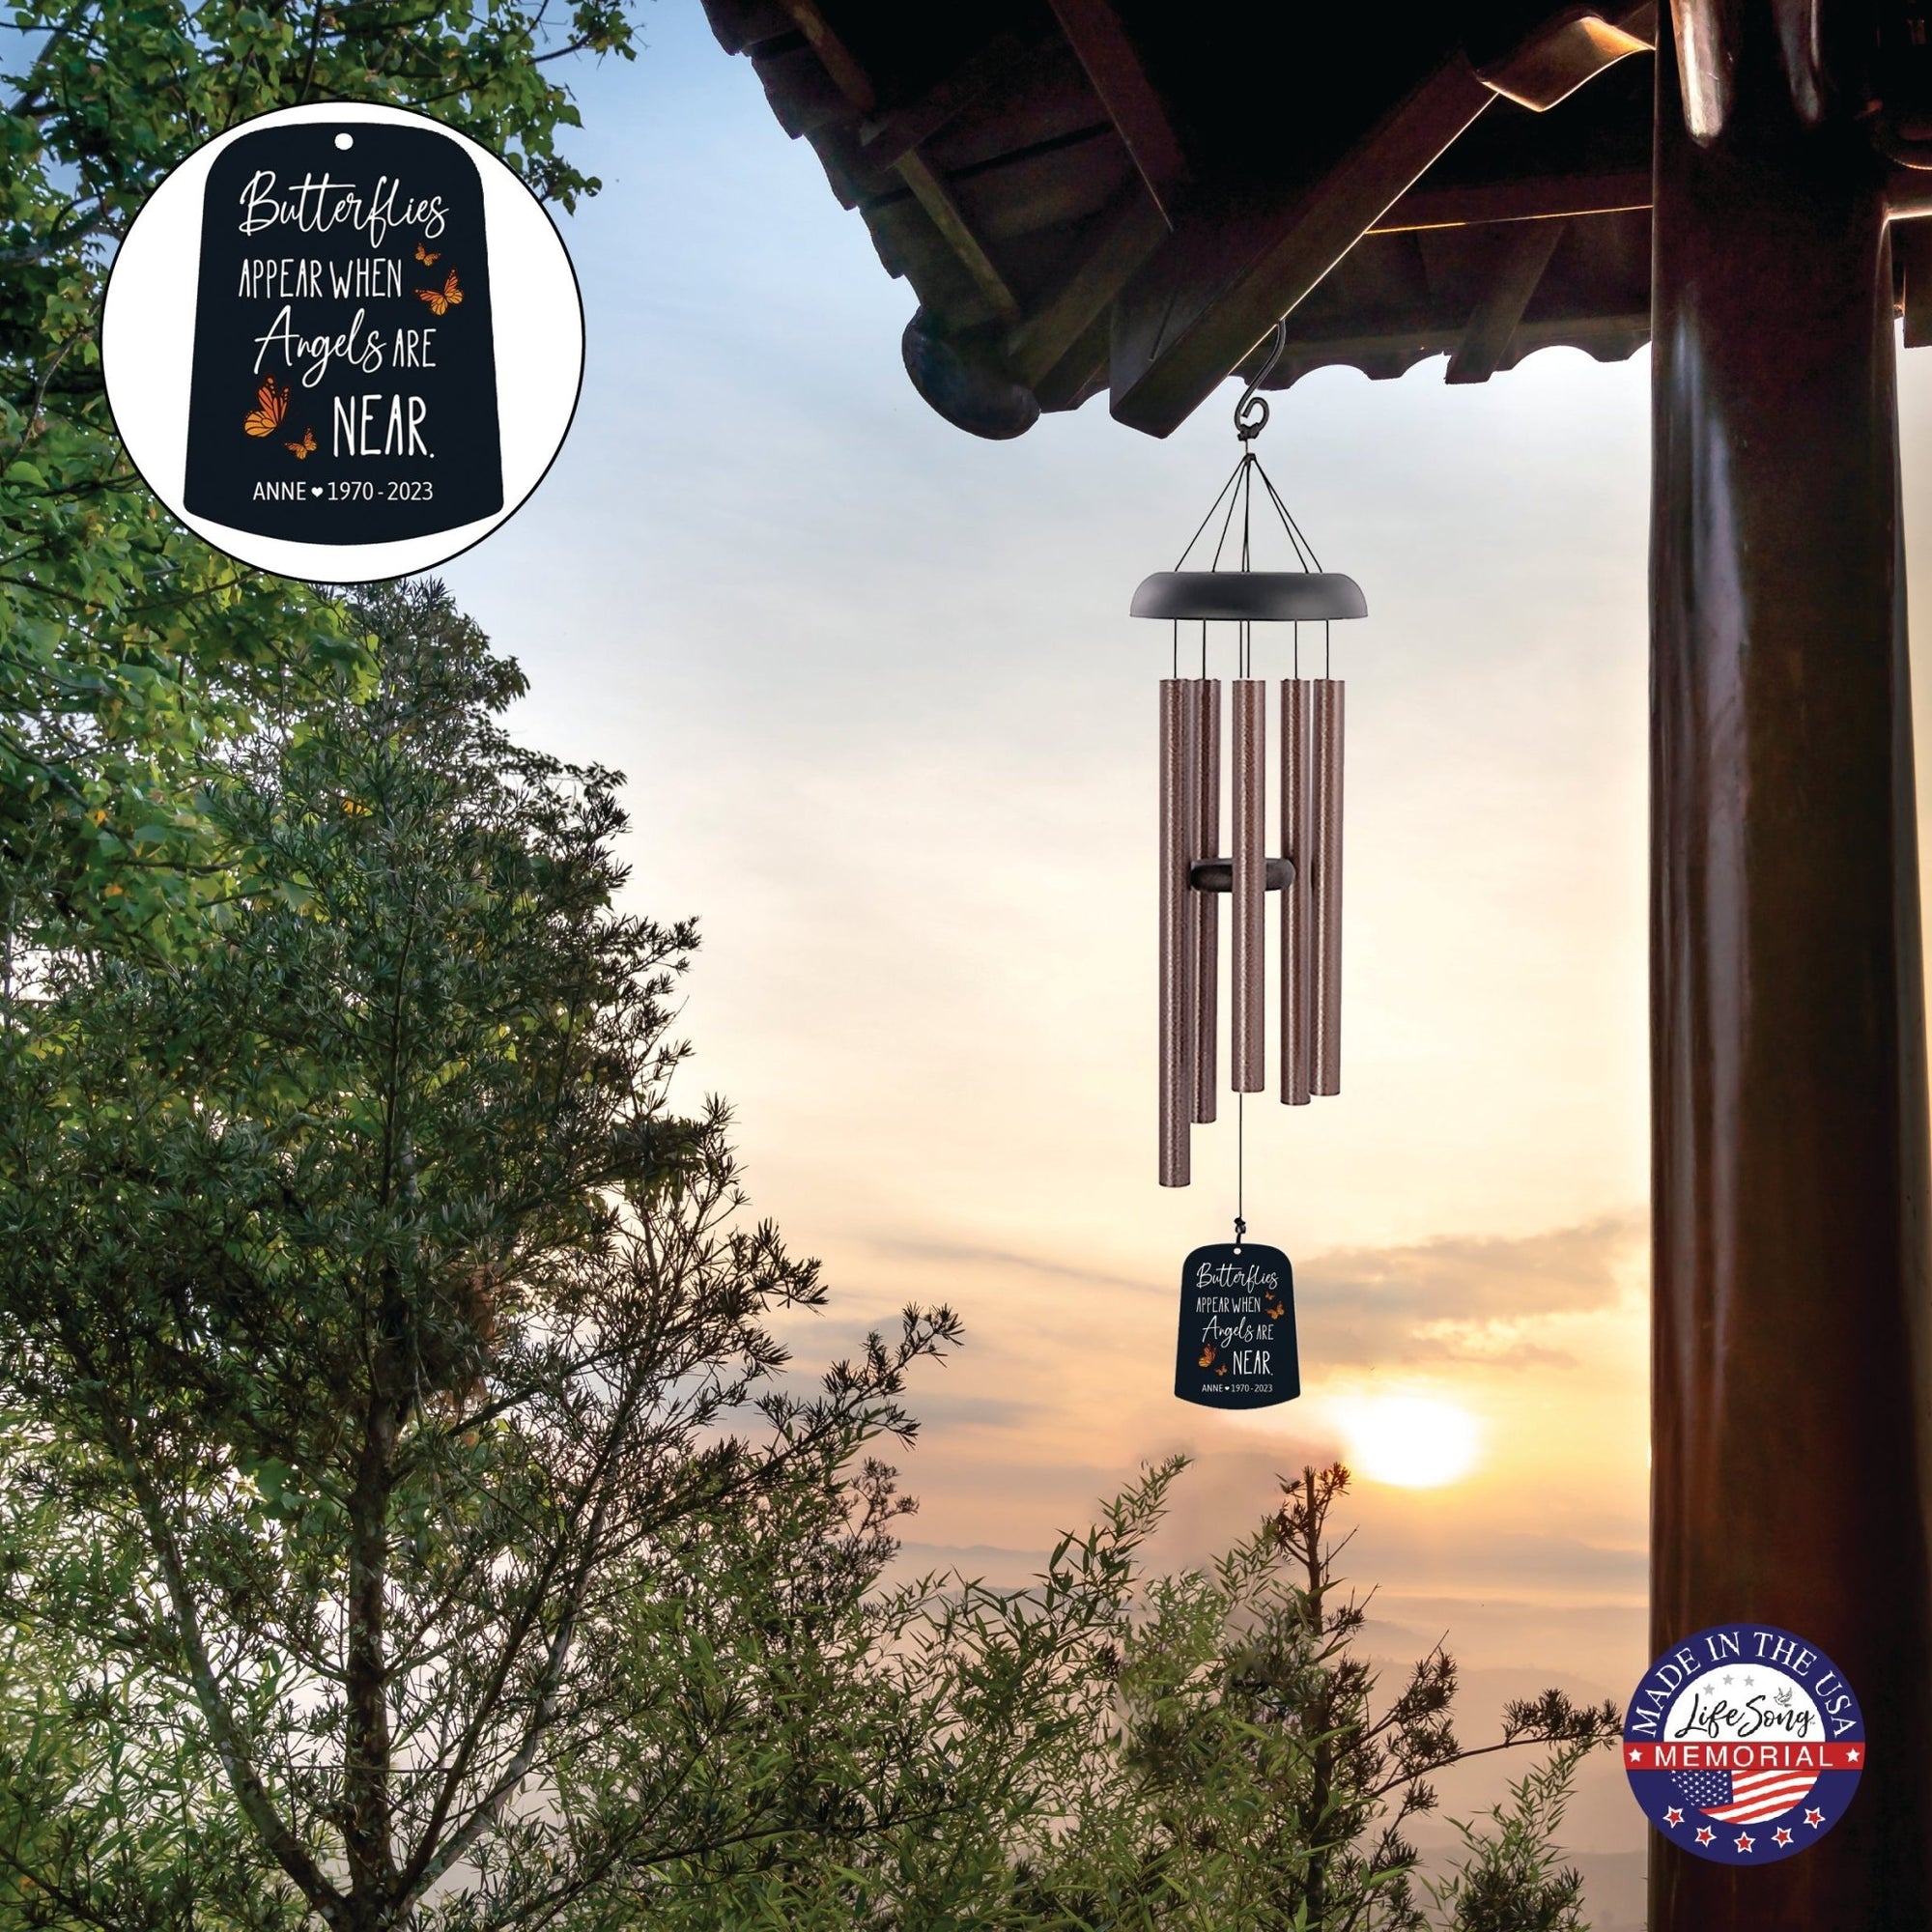 Personalized Memorial Wind Chime Sail Sympathy Gift - Angels Are Near (butterflies) - LifeSong Milestones